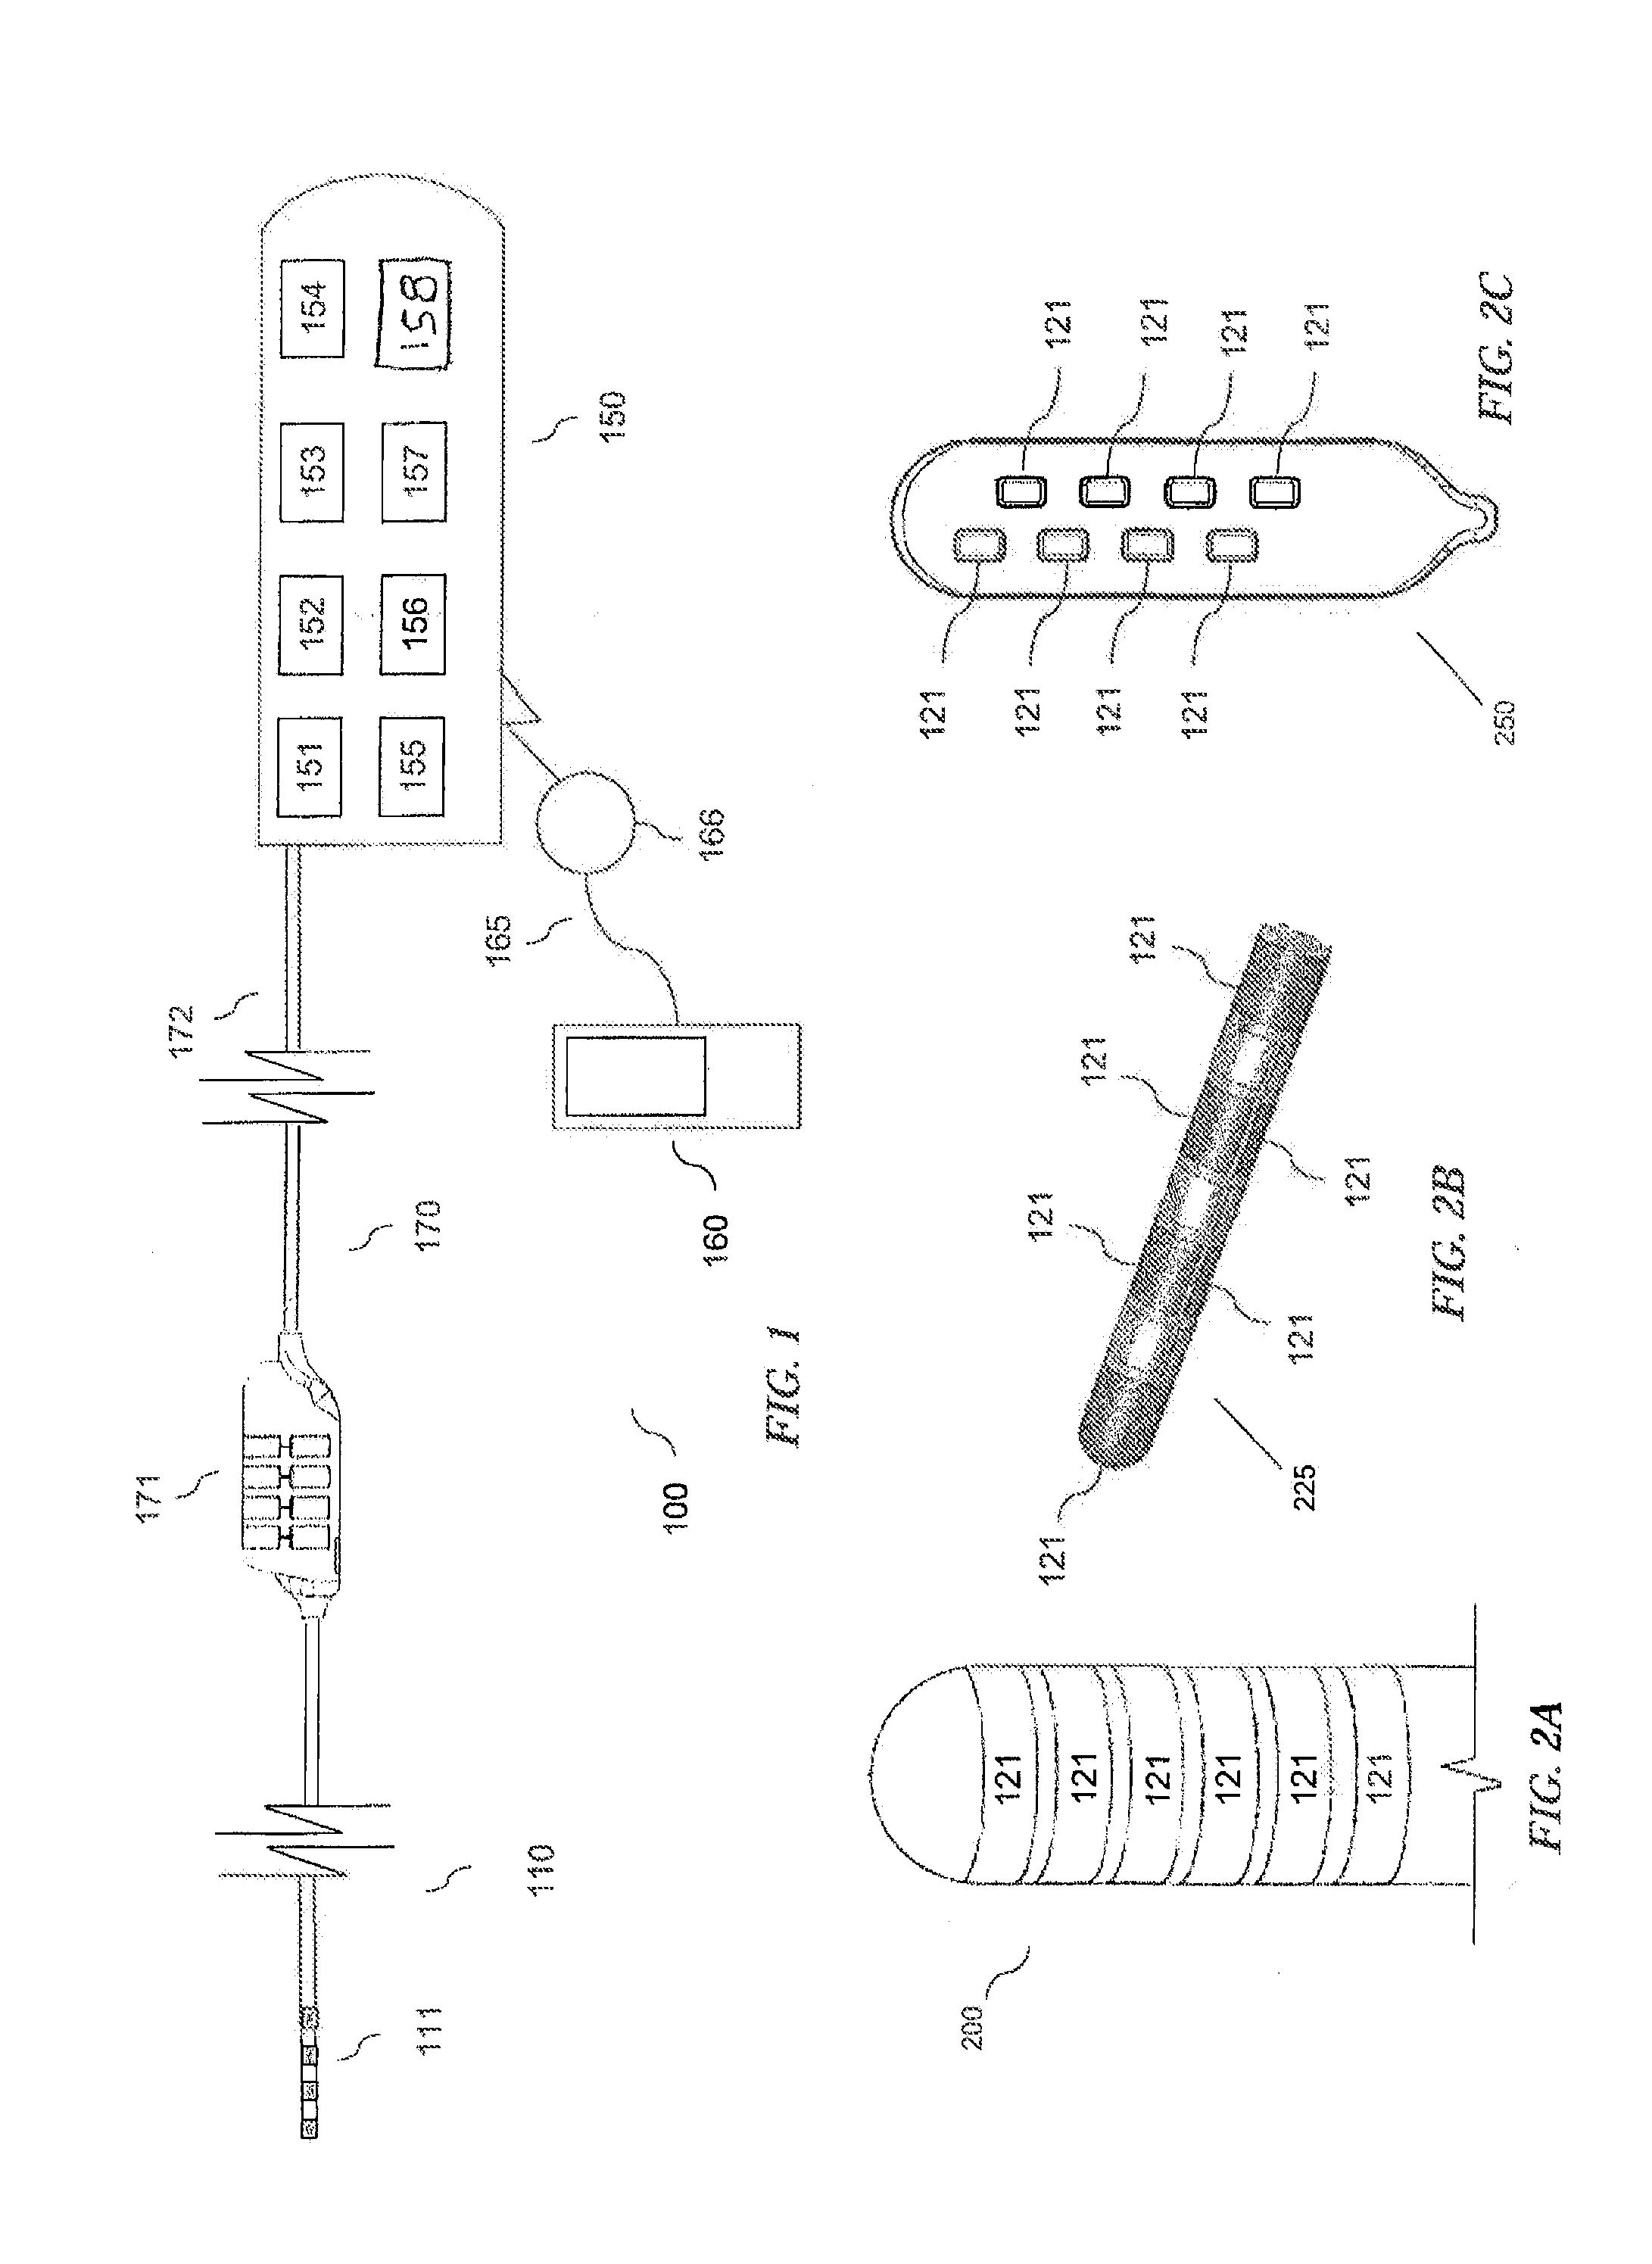 Method and system for non-linear feedback control of spinal cord stimulation